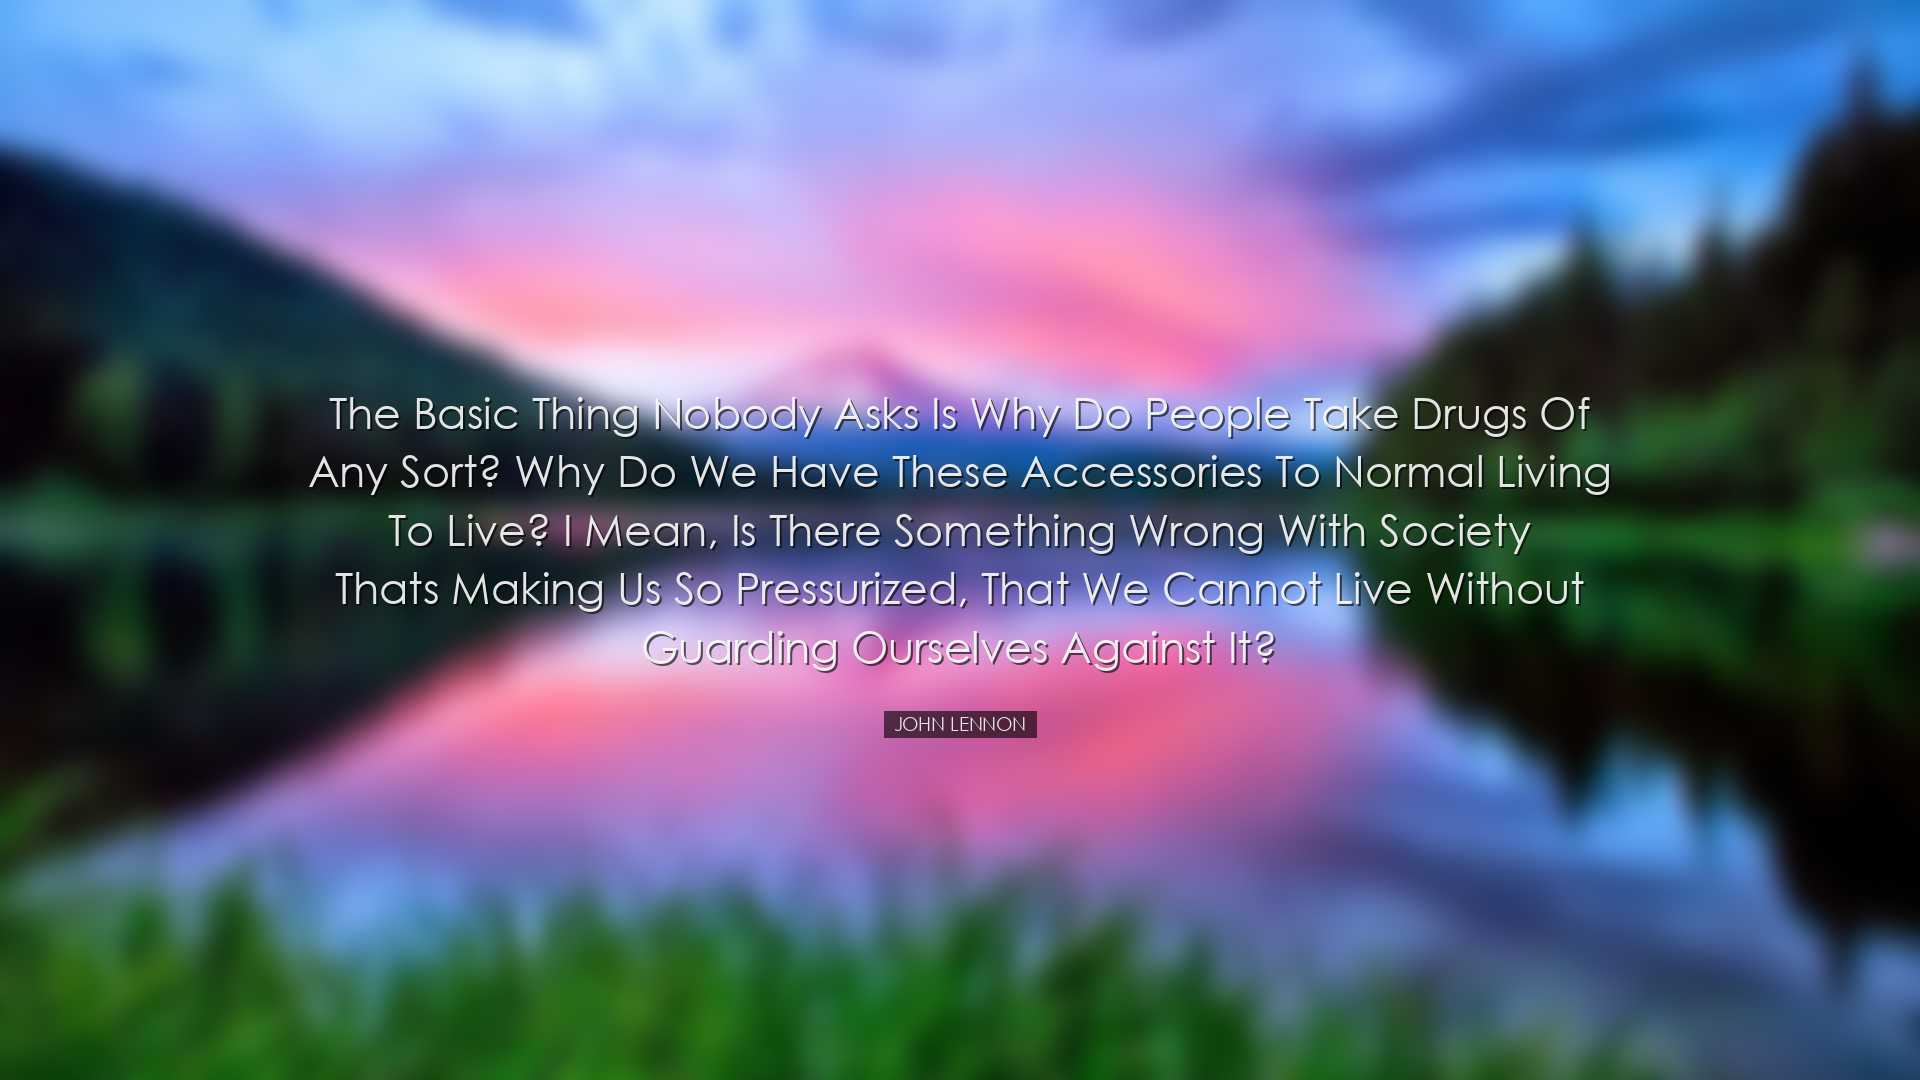 The basic thing nobody asks is why do people take drugs of any sor